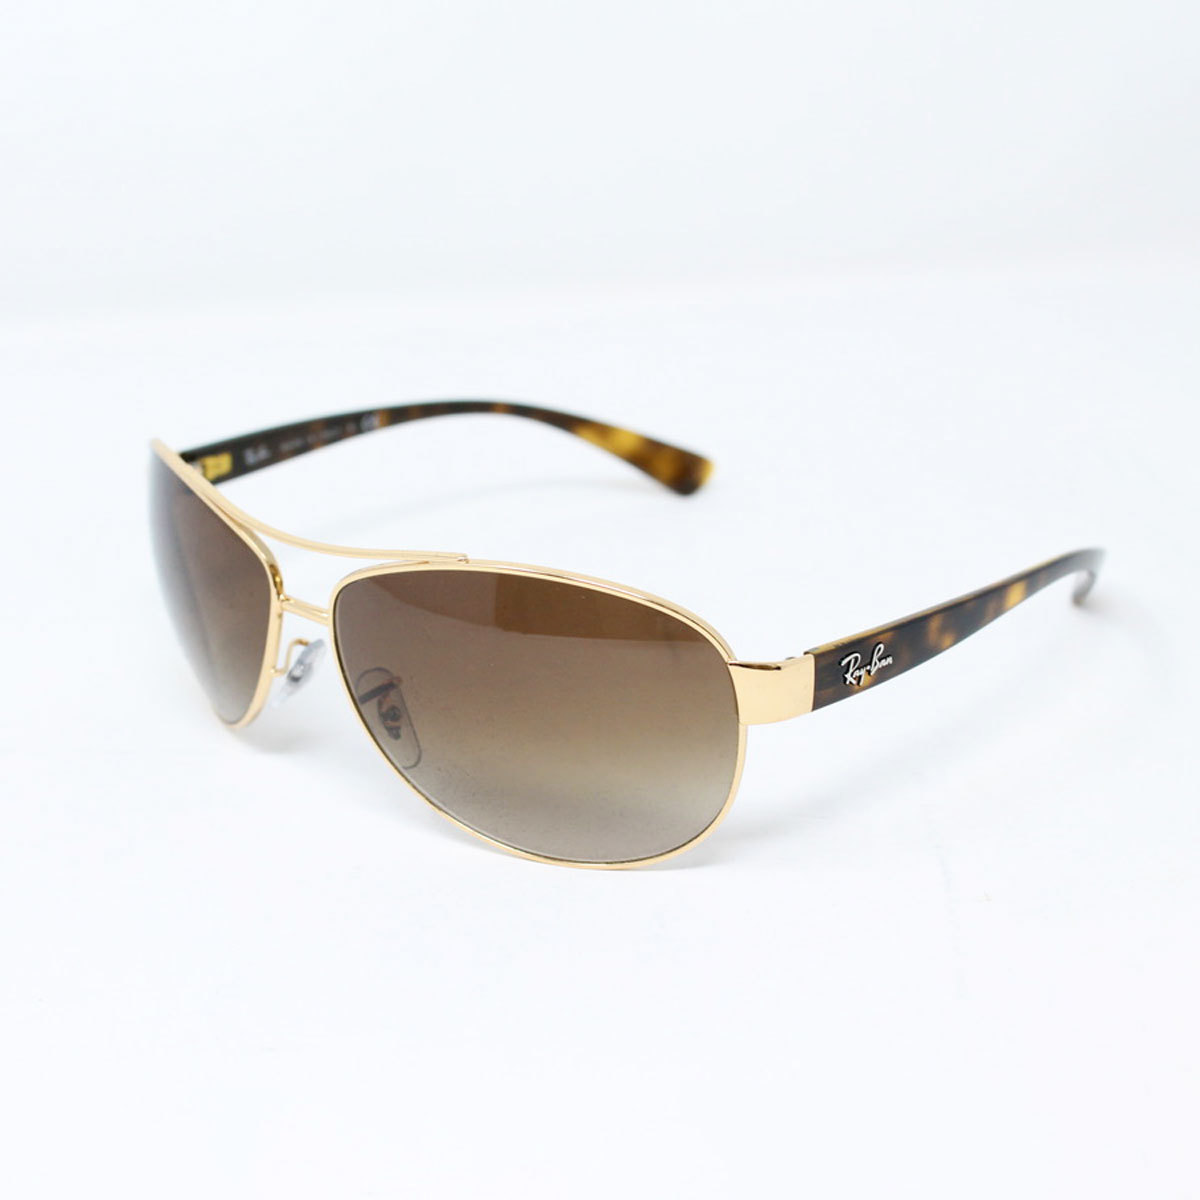 Ray-Ban Aviator Gold & Tortoise Shell Sunglasses with Brown Lenses, RB3386 001/13